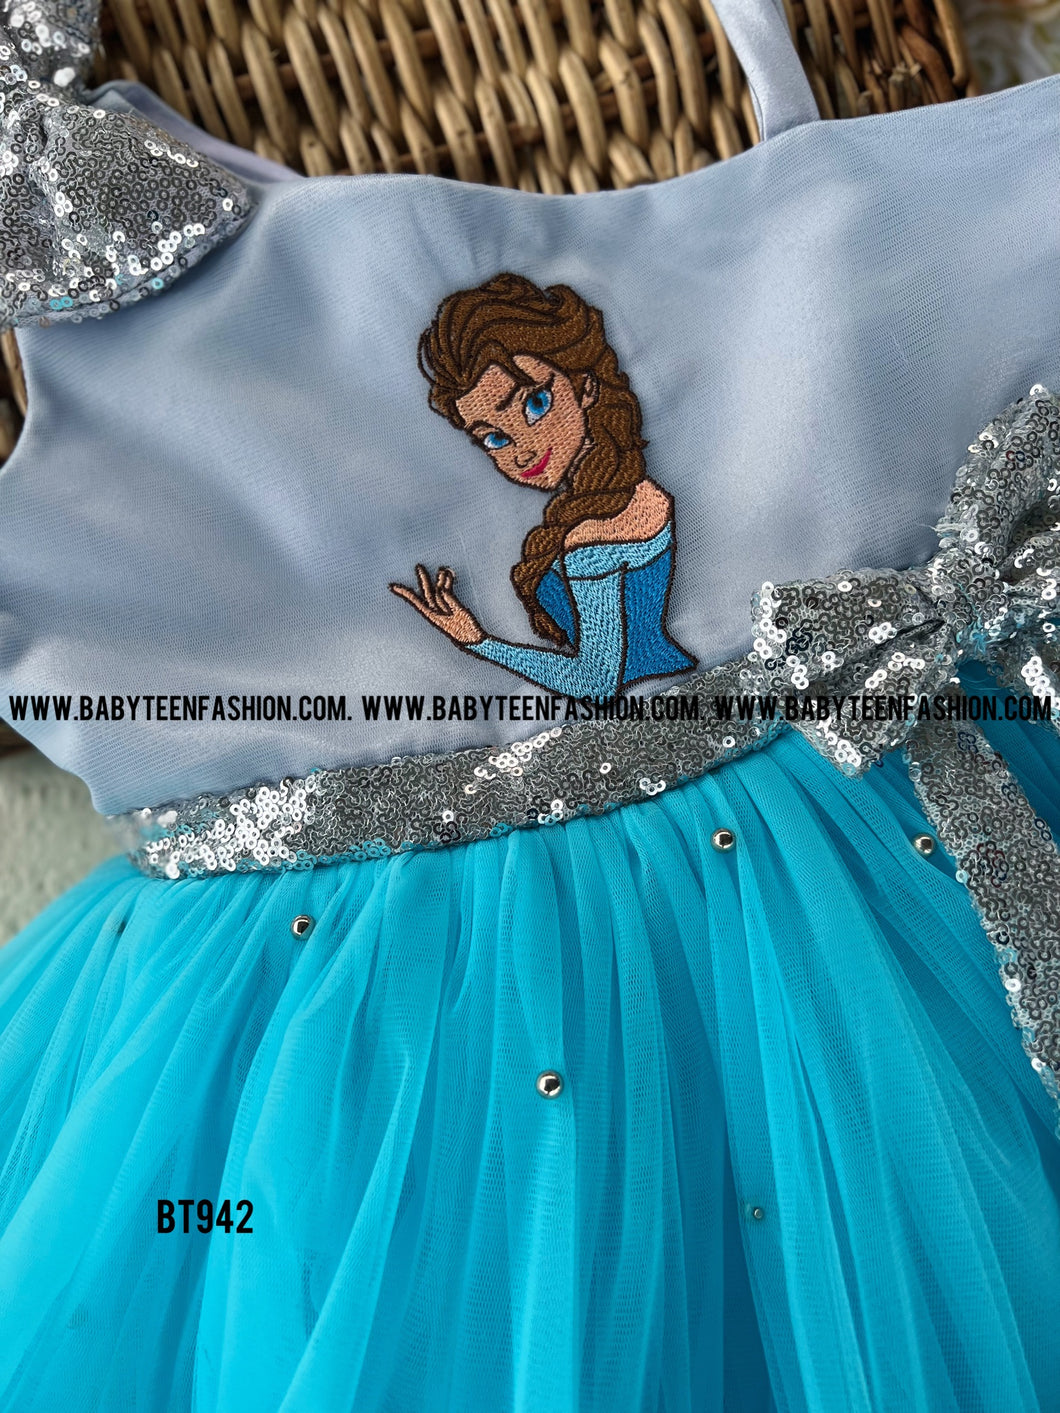 BT942 Princess Elsa Crystal Cascade Party Dress - Twinkle in Turquoise